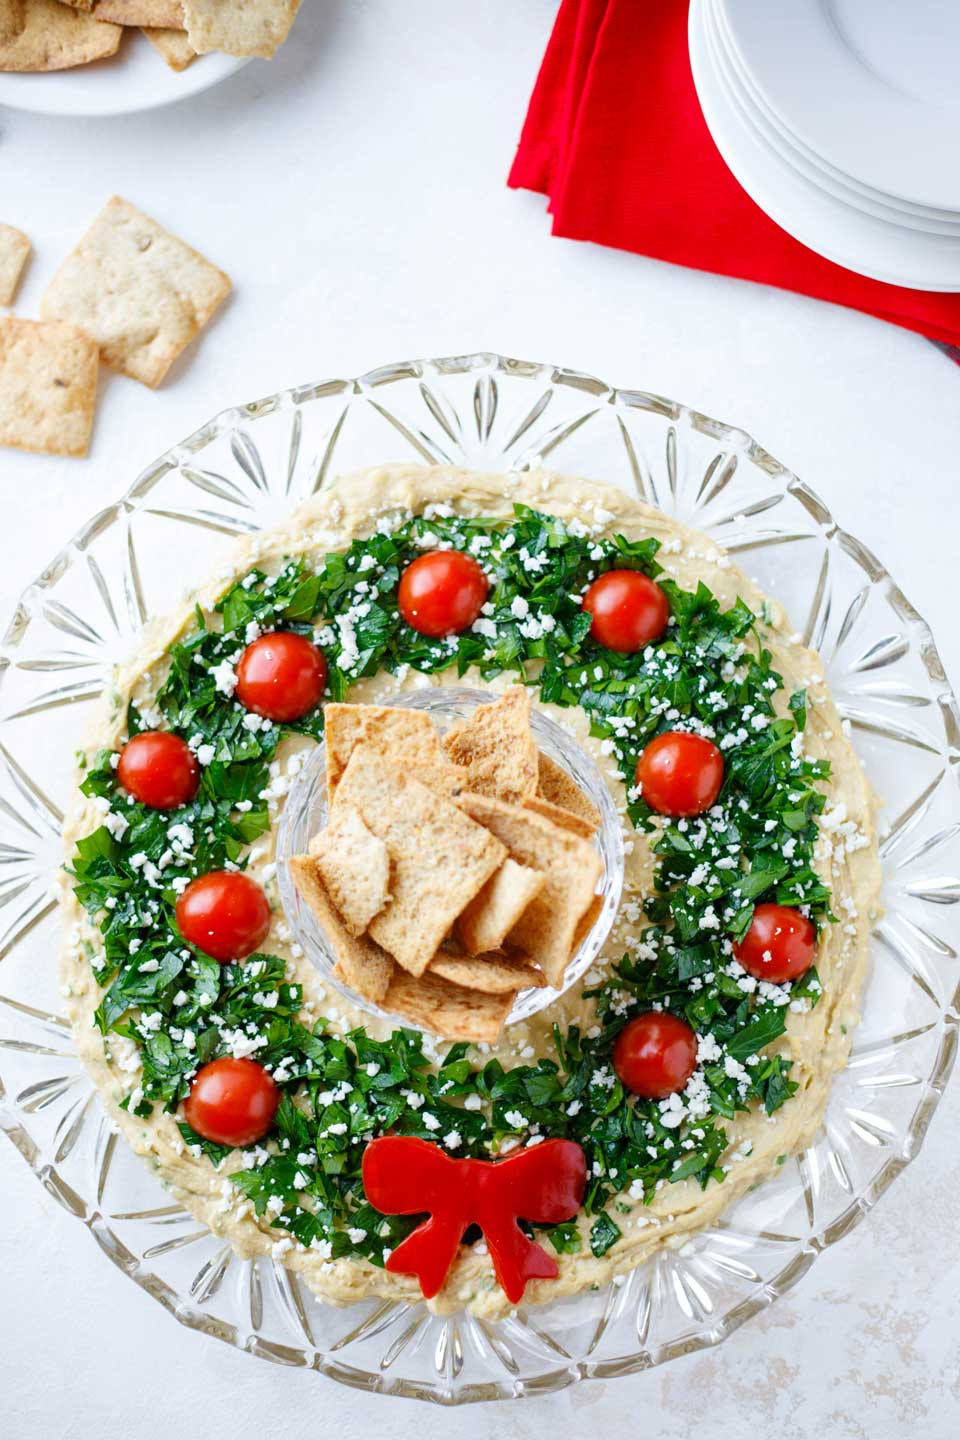 Horderves Ideas For Christmas Party
 Easy Christmas Appetizer "Hummus Wreath" Two Healthy